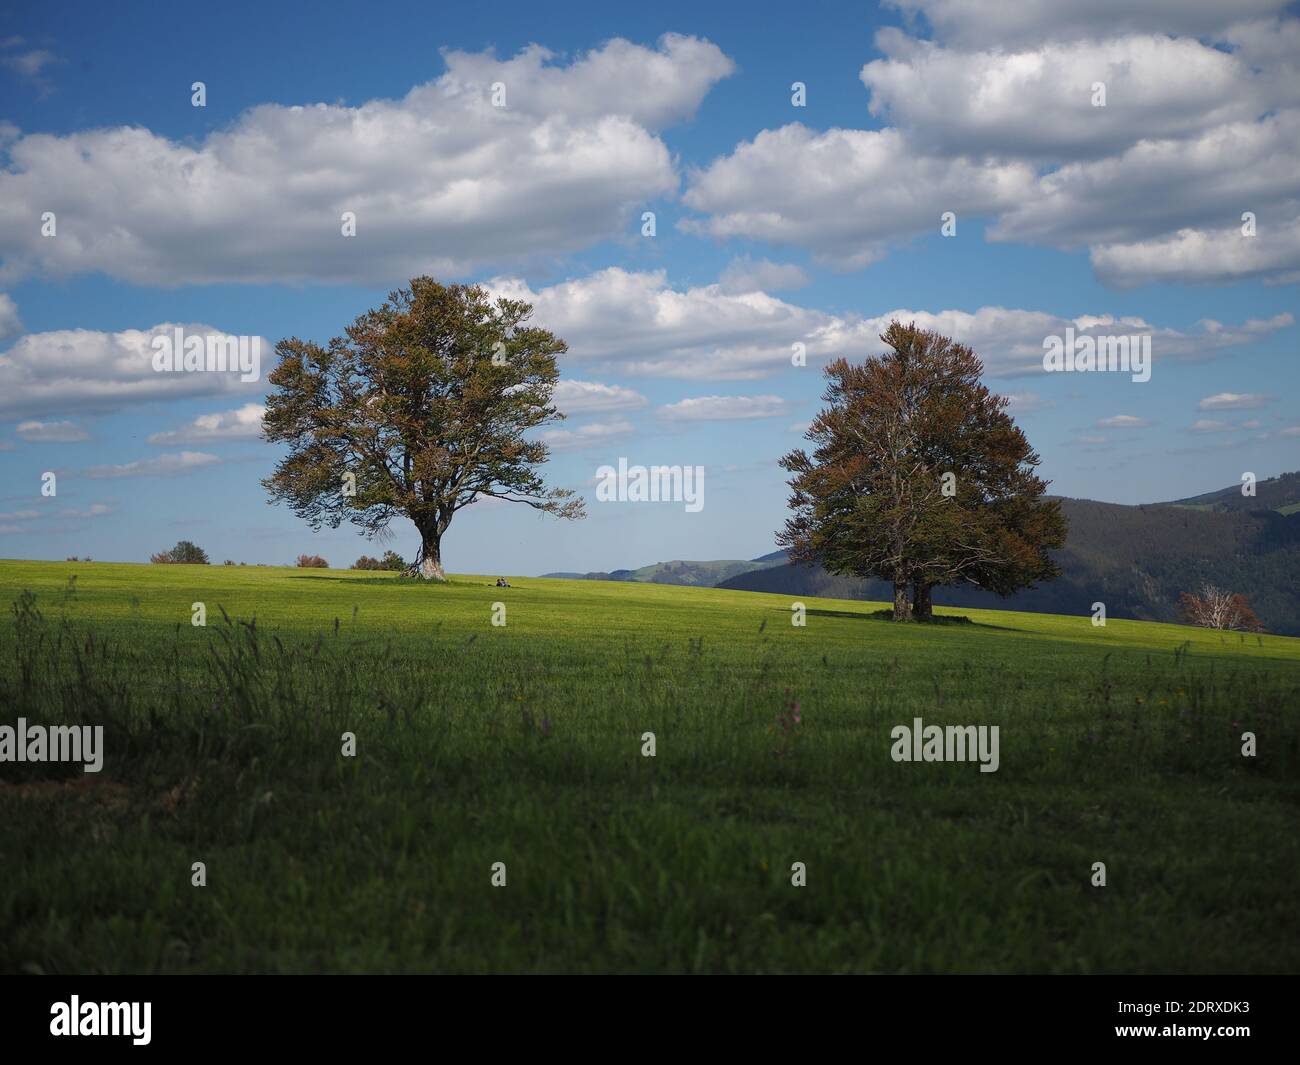 Trees On Field Against Sky Stock Photo